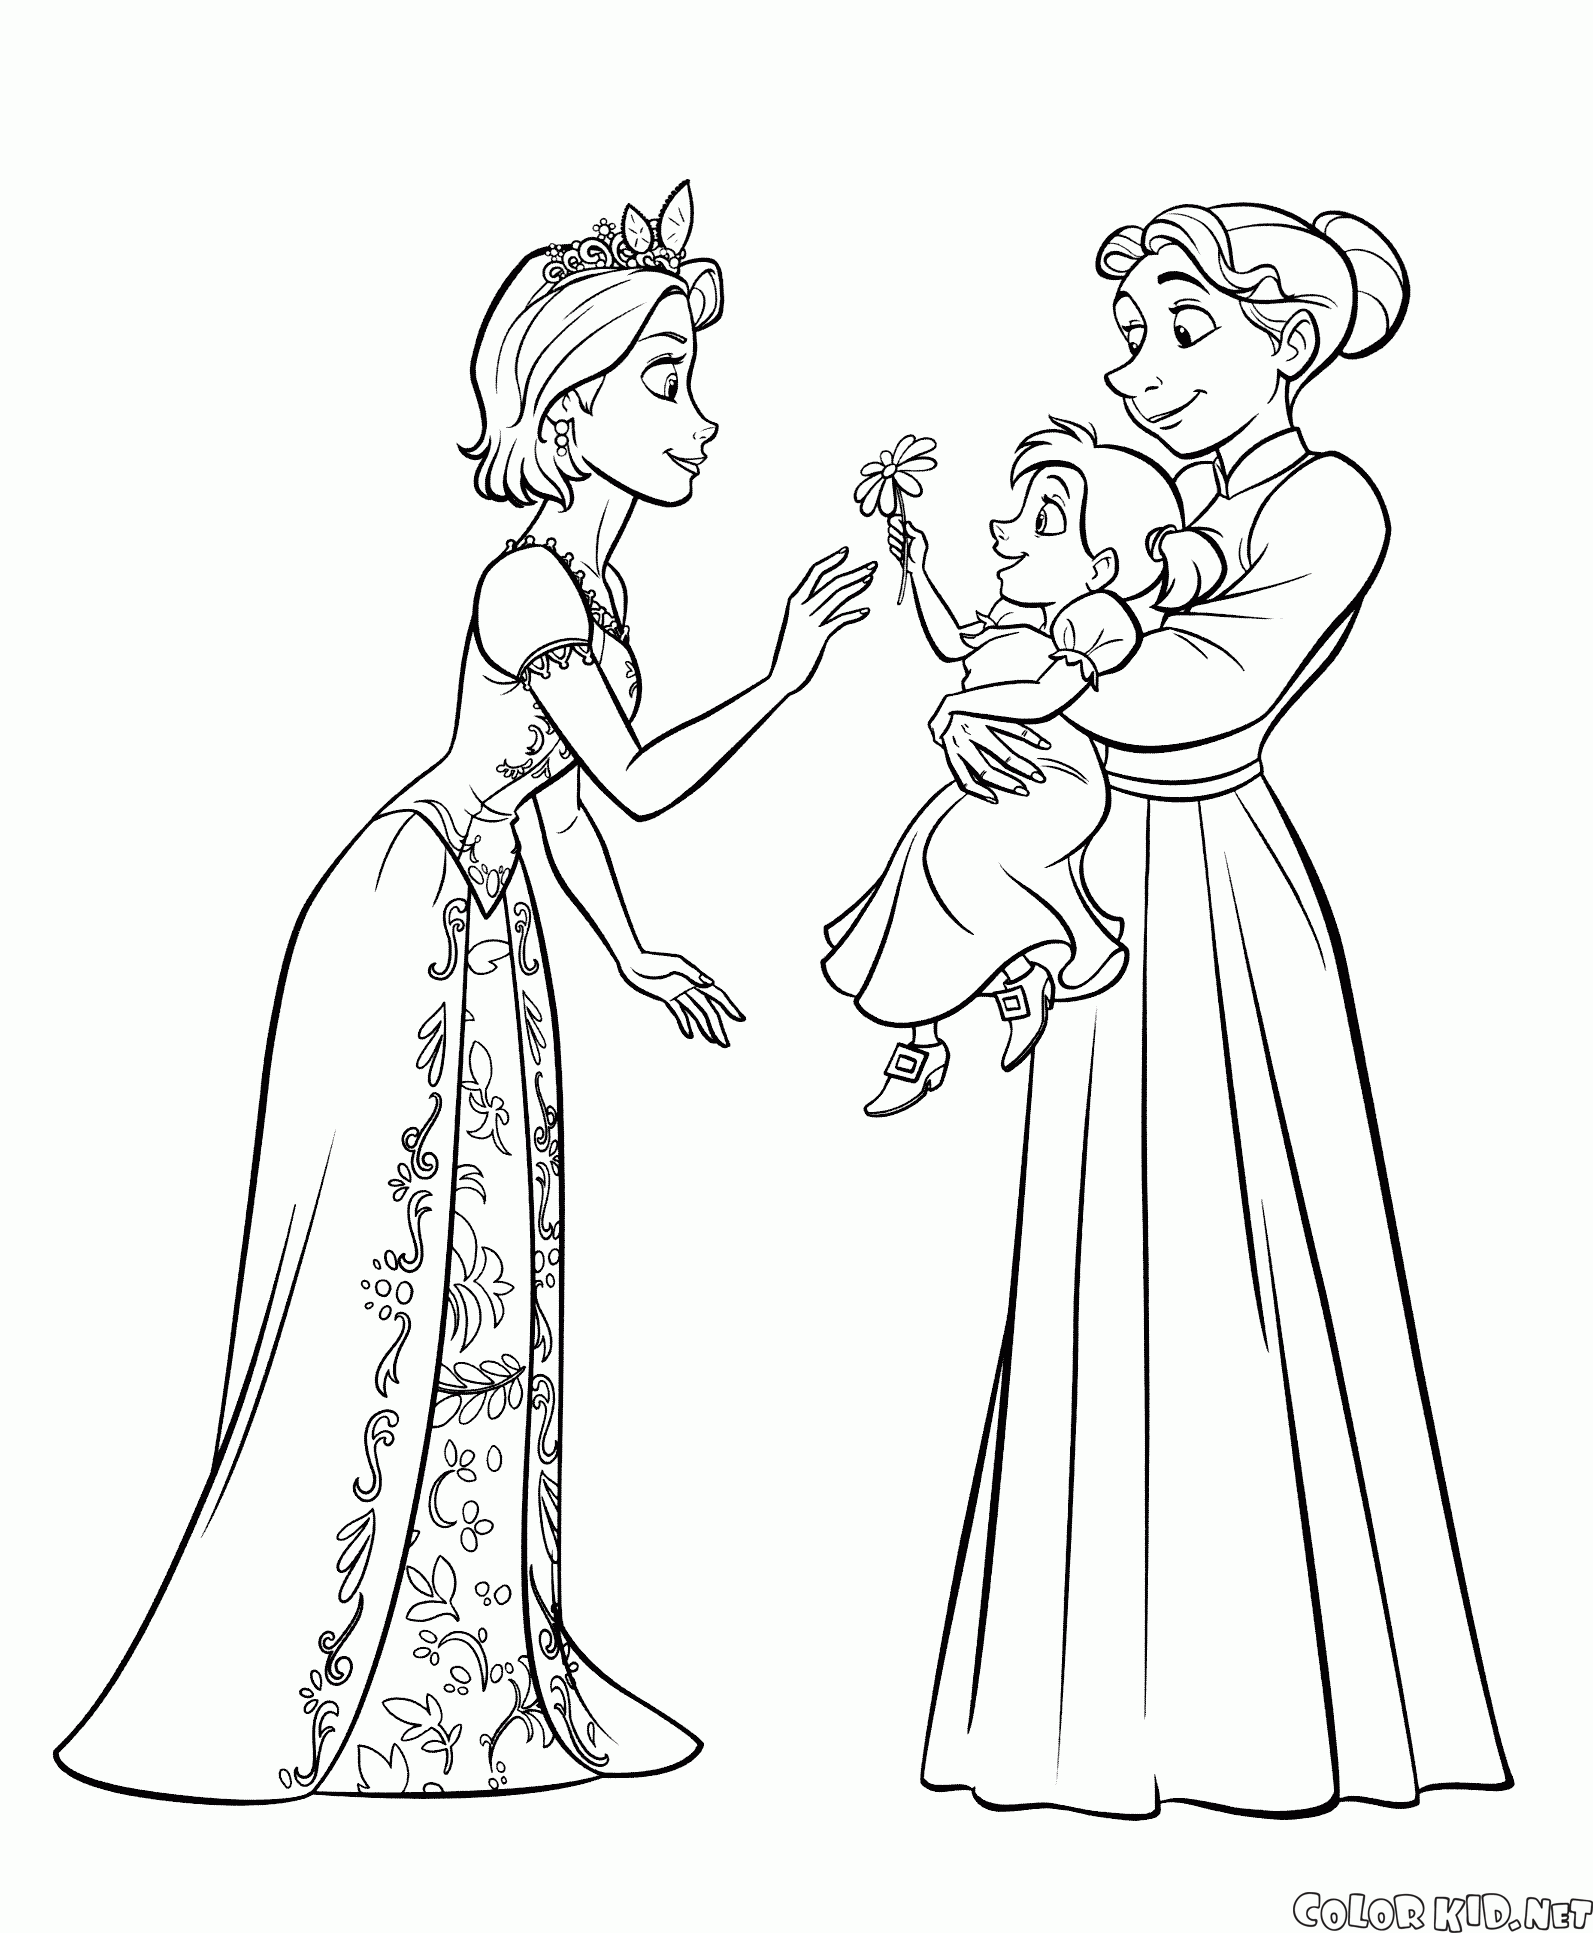 Coloring page - Meeting Flynn and Rapunzel